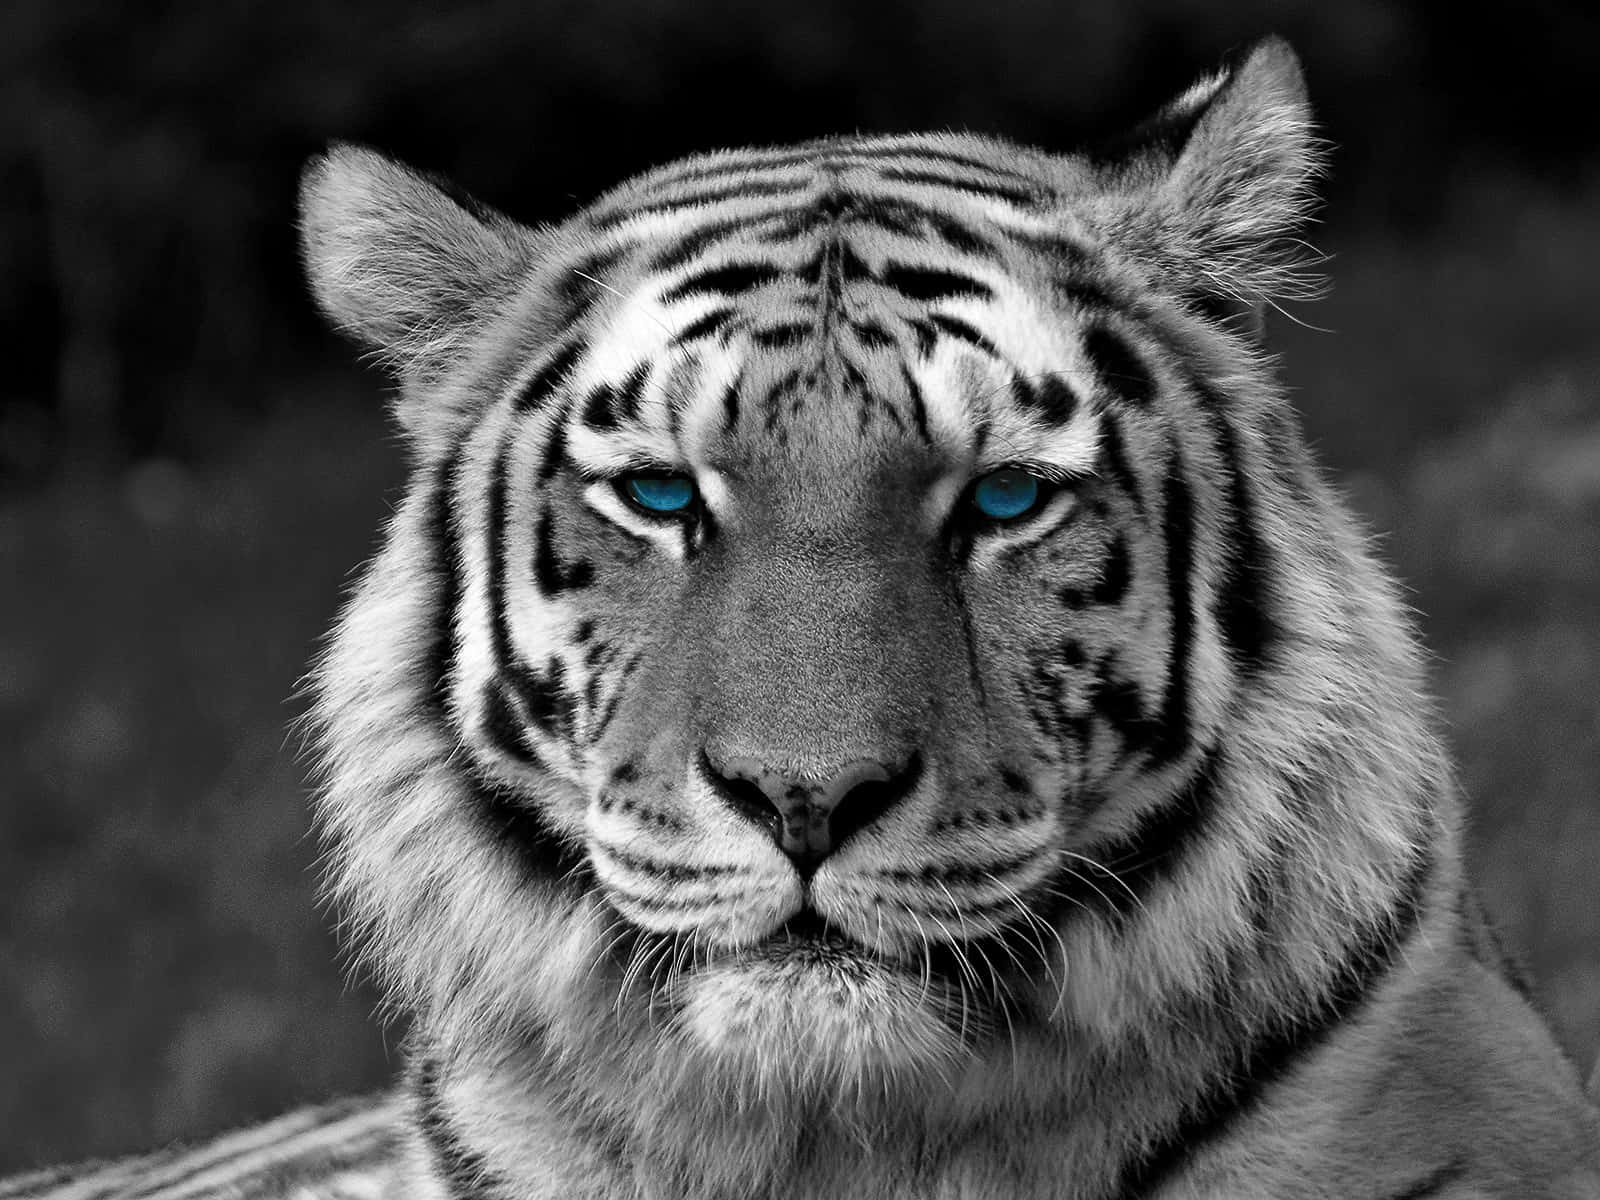 Tiger Face With Blue Eye Background